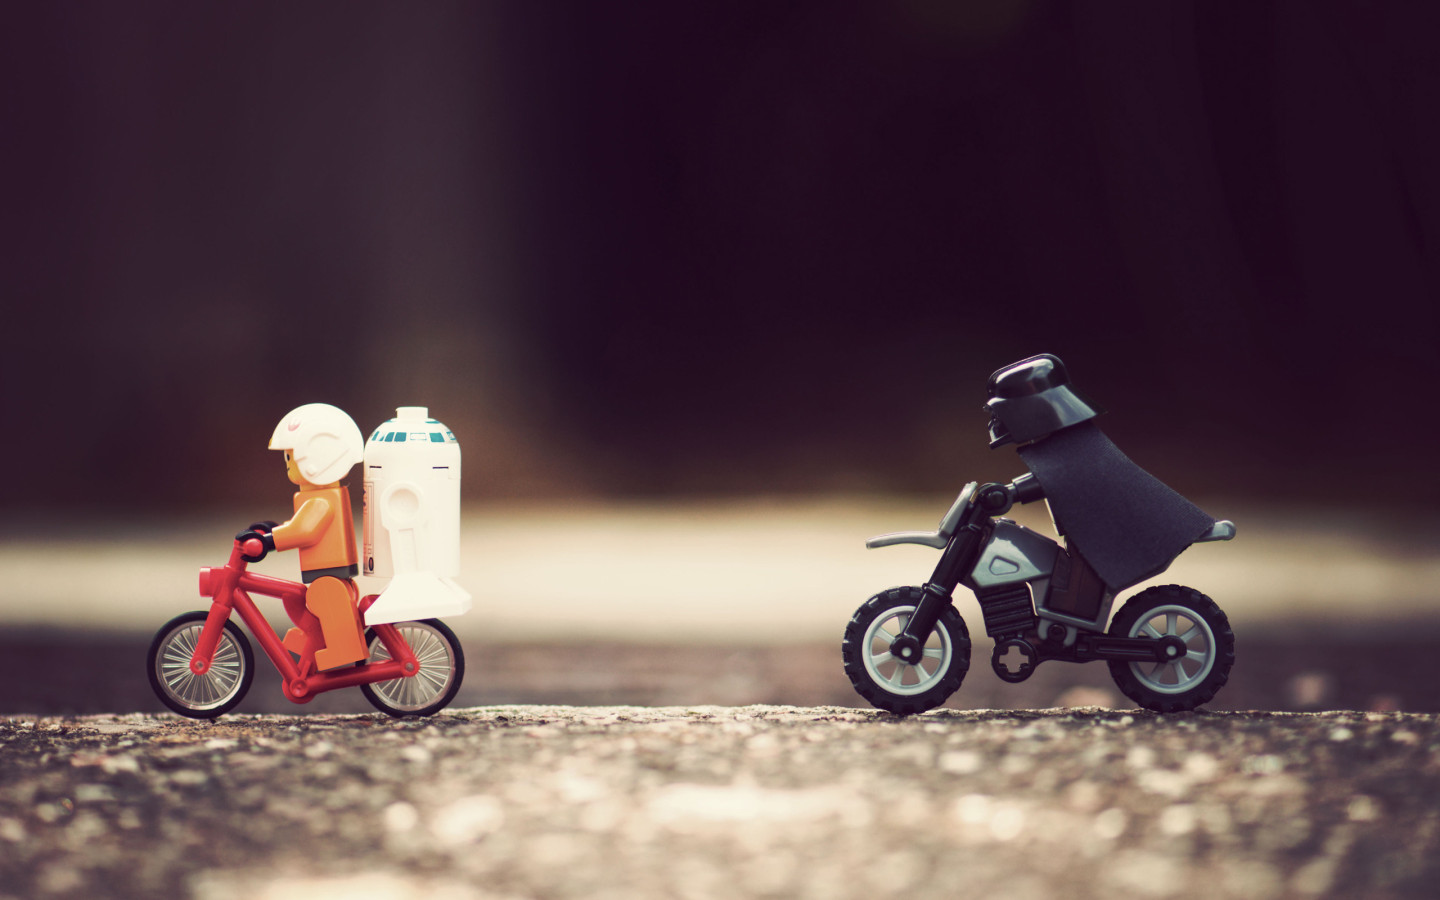 Previous, Funny wallpapers - Star Wars Lego wallpaper